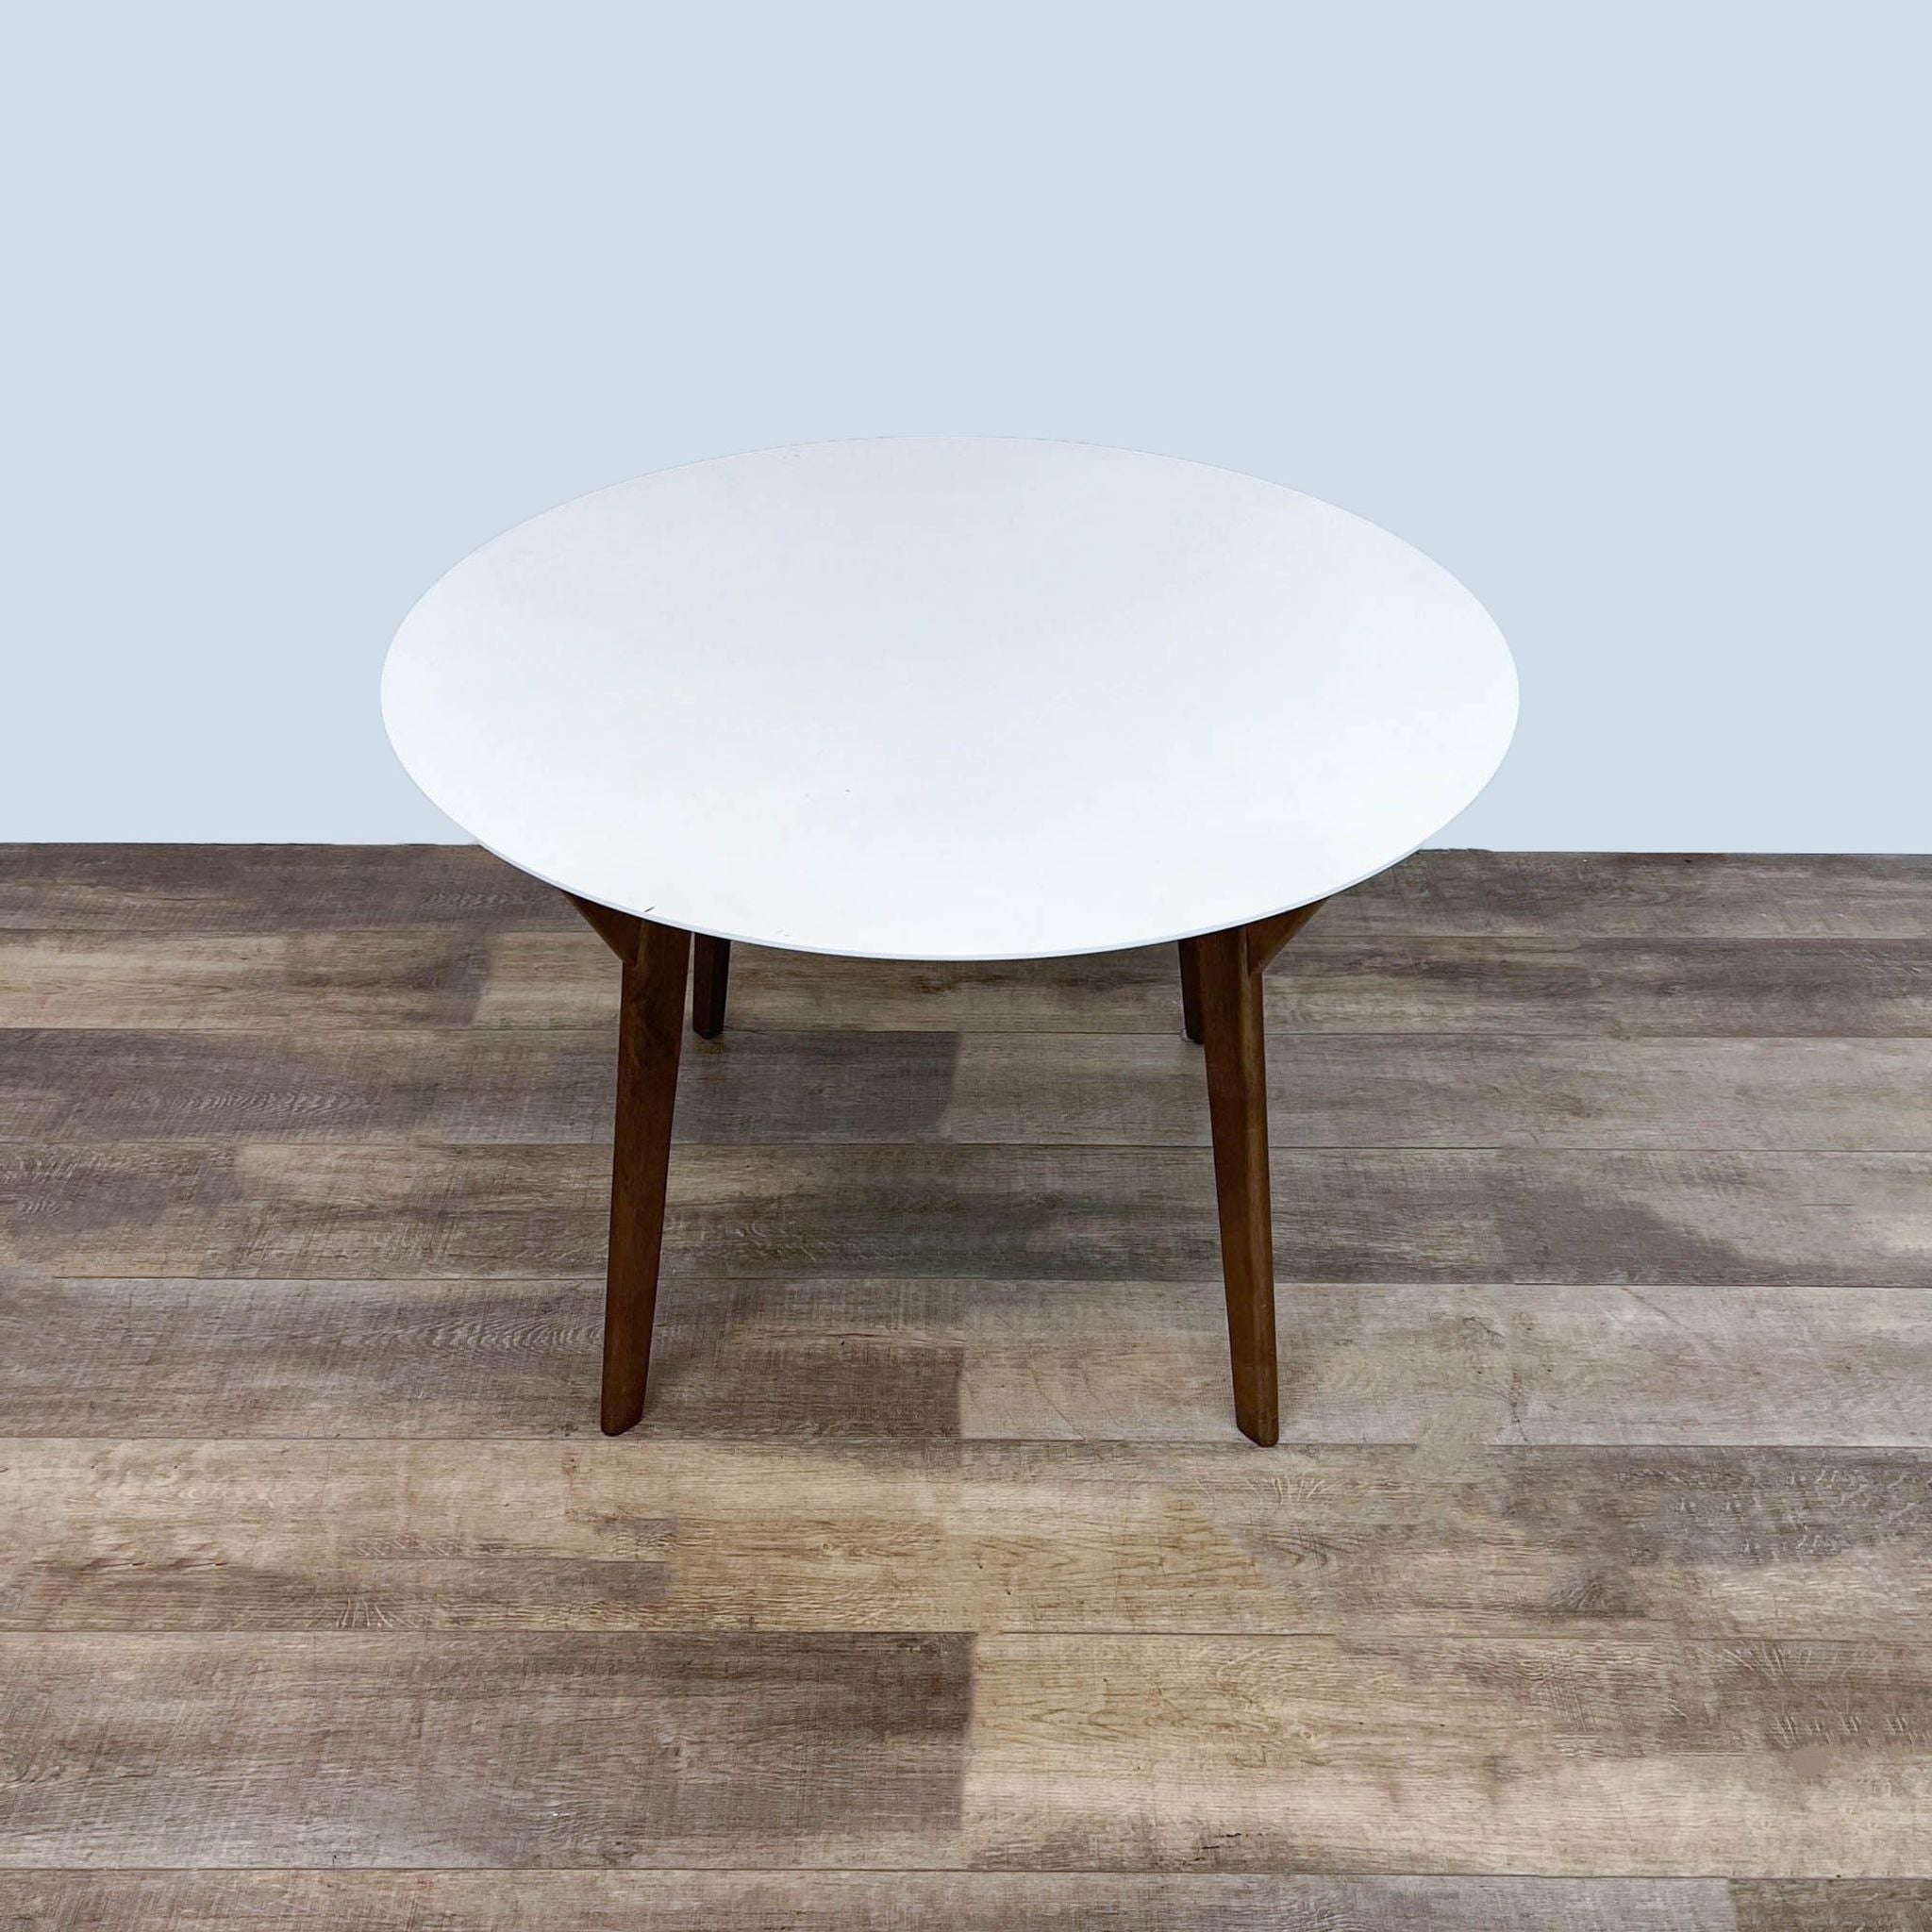 Modern Wegmans round white dining table with solid wood legs against neutral background for a clean look.